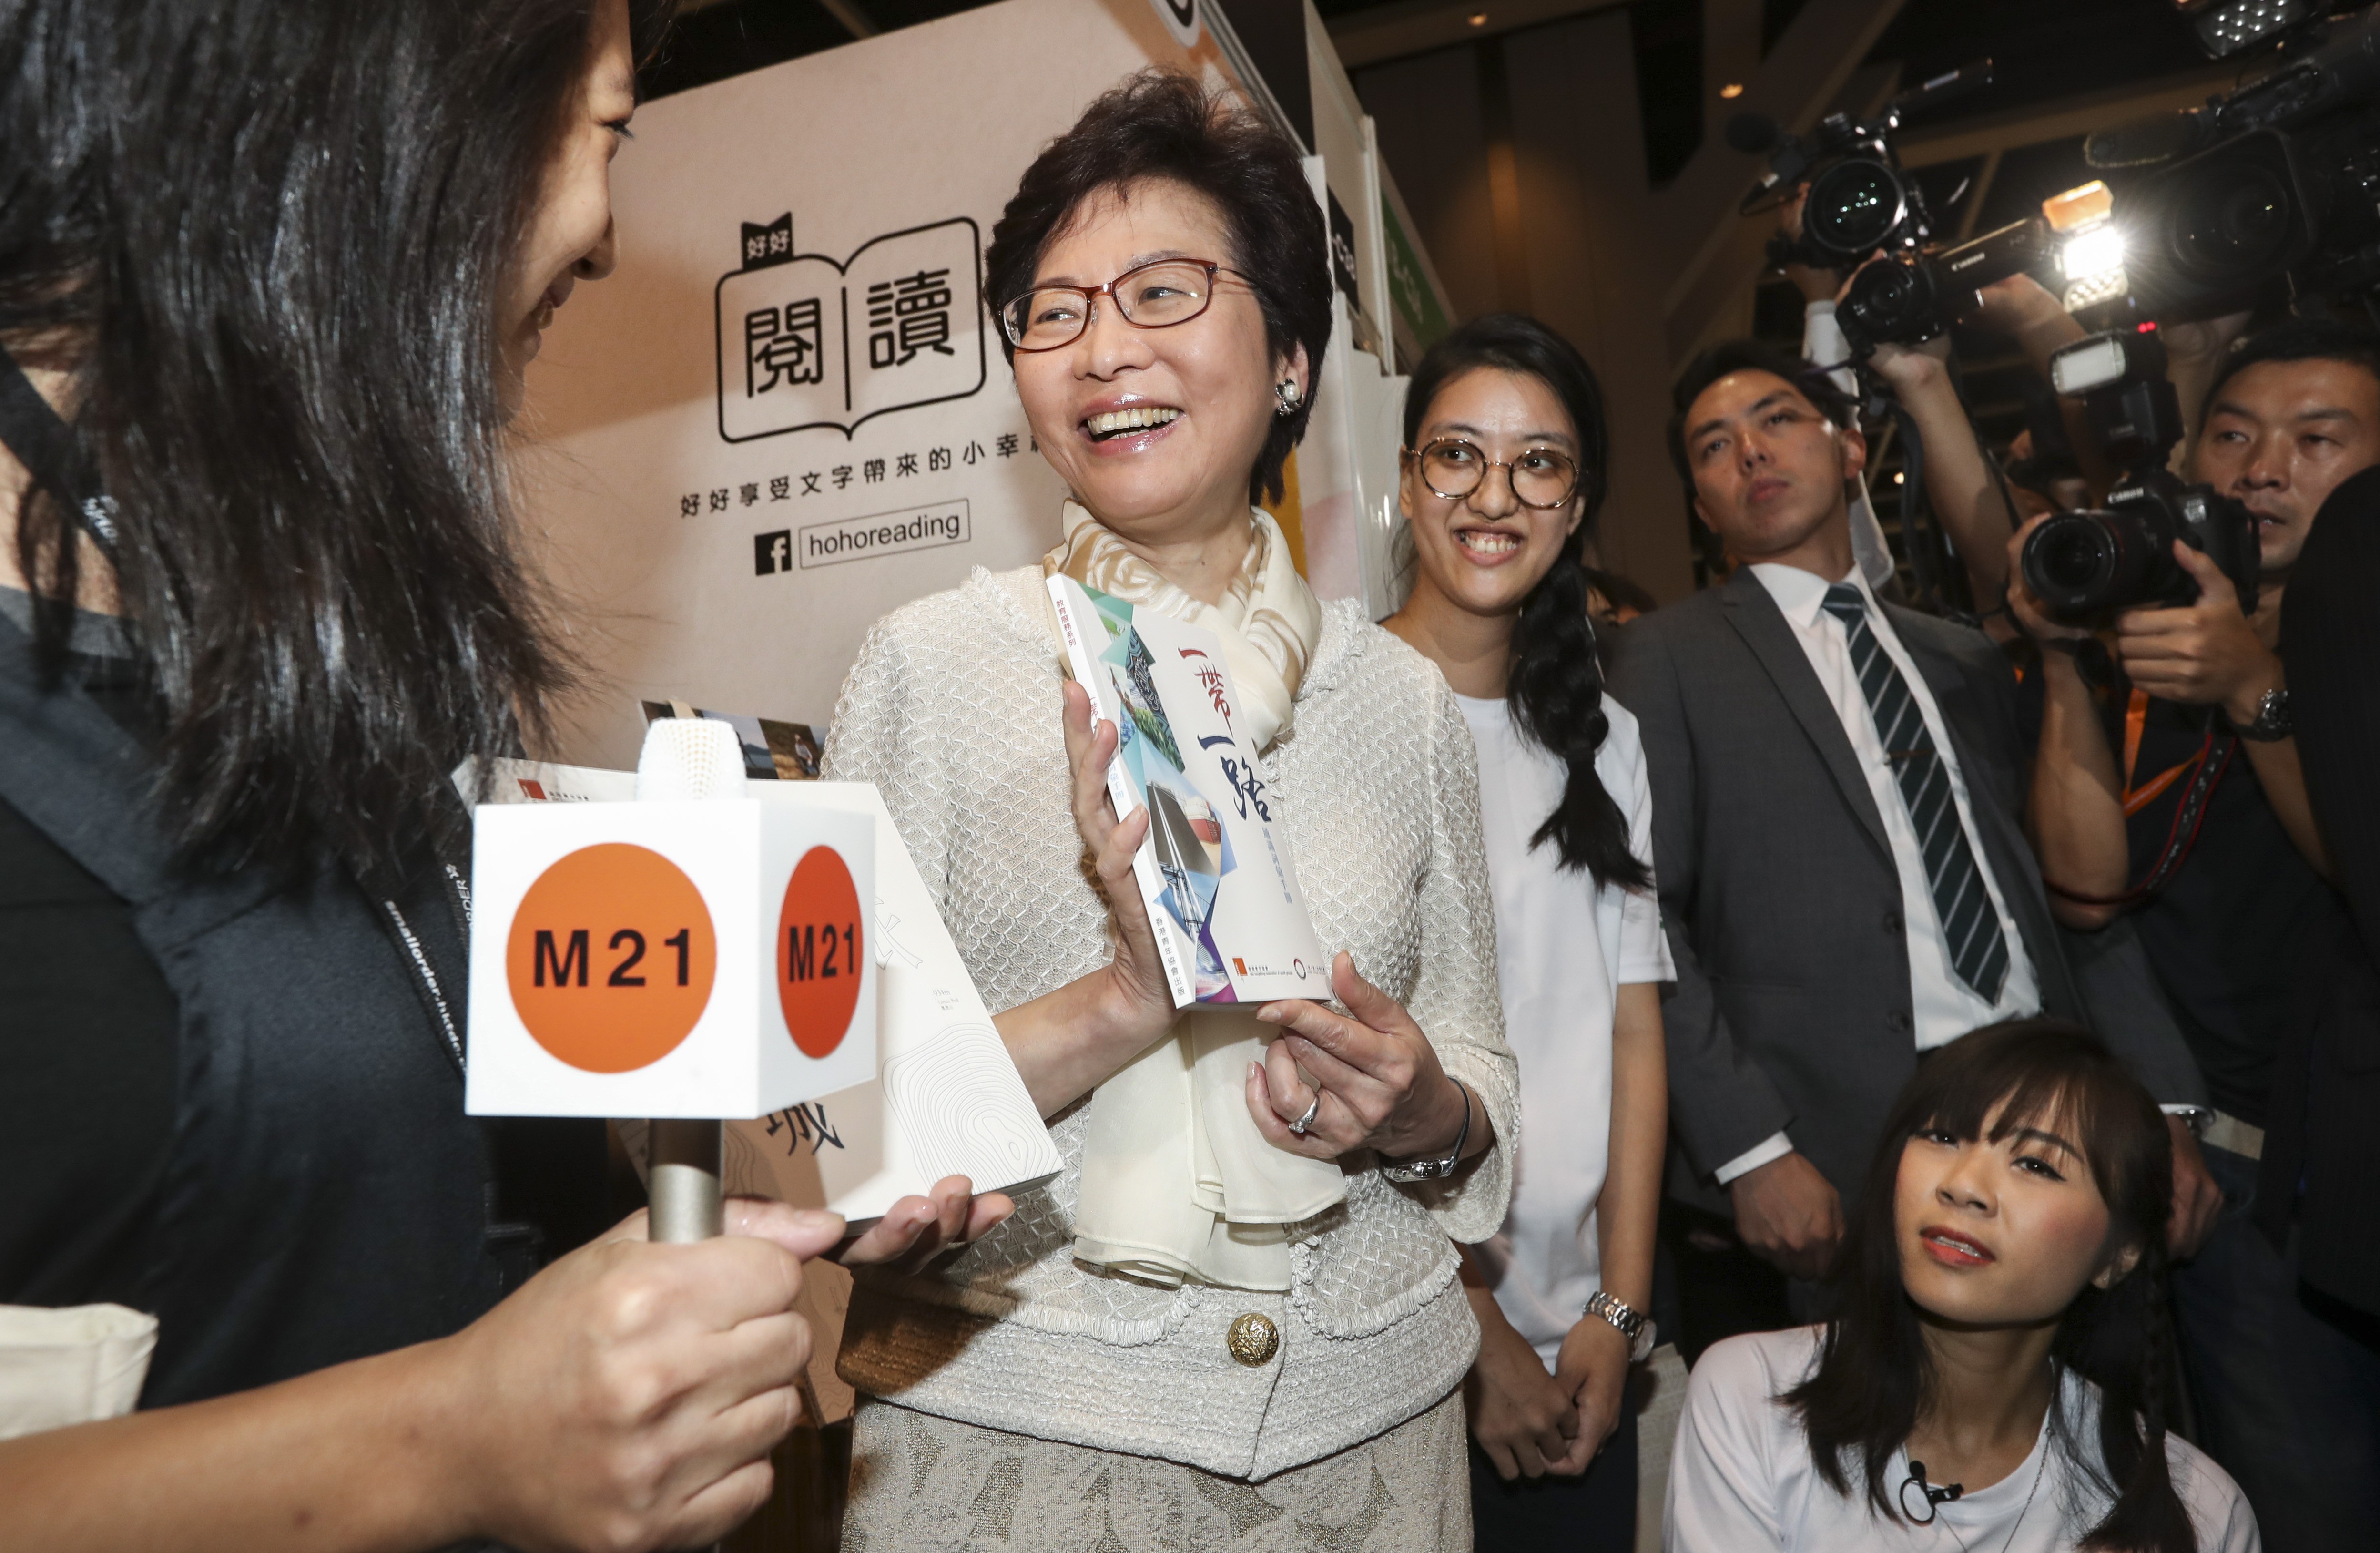 Hong Kong Chief Executive Carrie Lam visits the Hong Kong Federation of Youth Groups booth during the Book Fair at the Hong Kong Convention and Exhibition Centre in July. Photo: Nora Tam